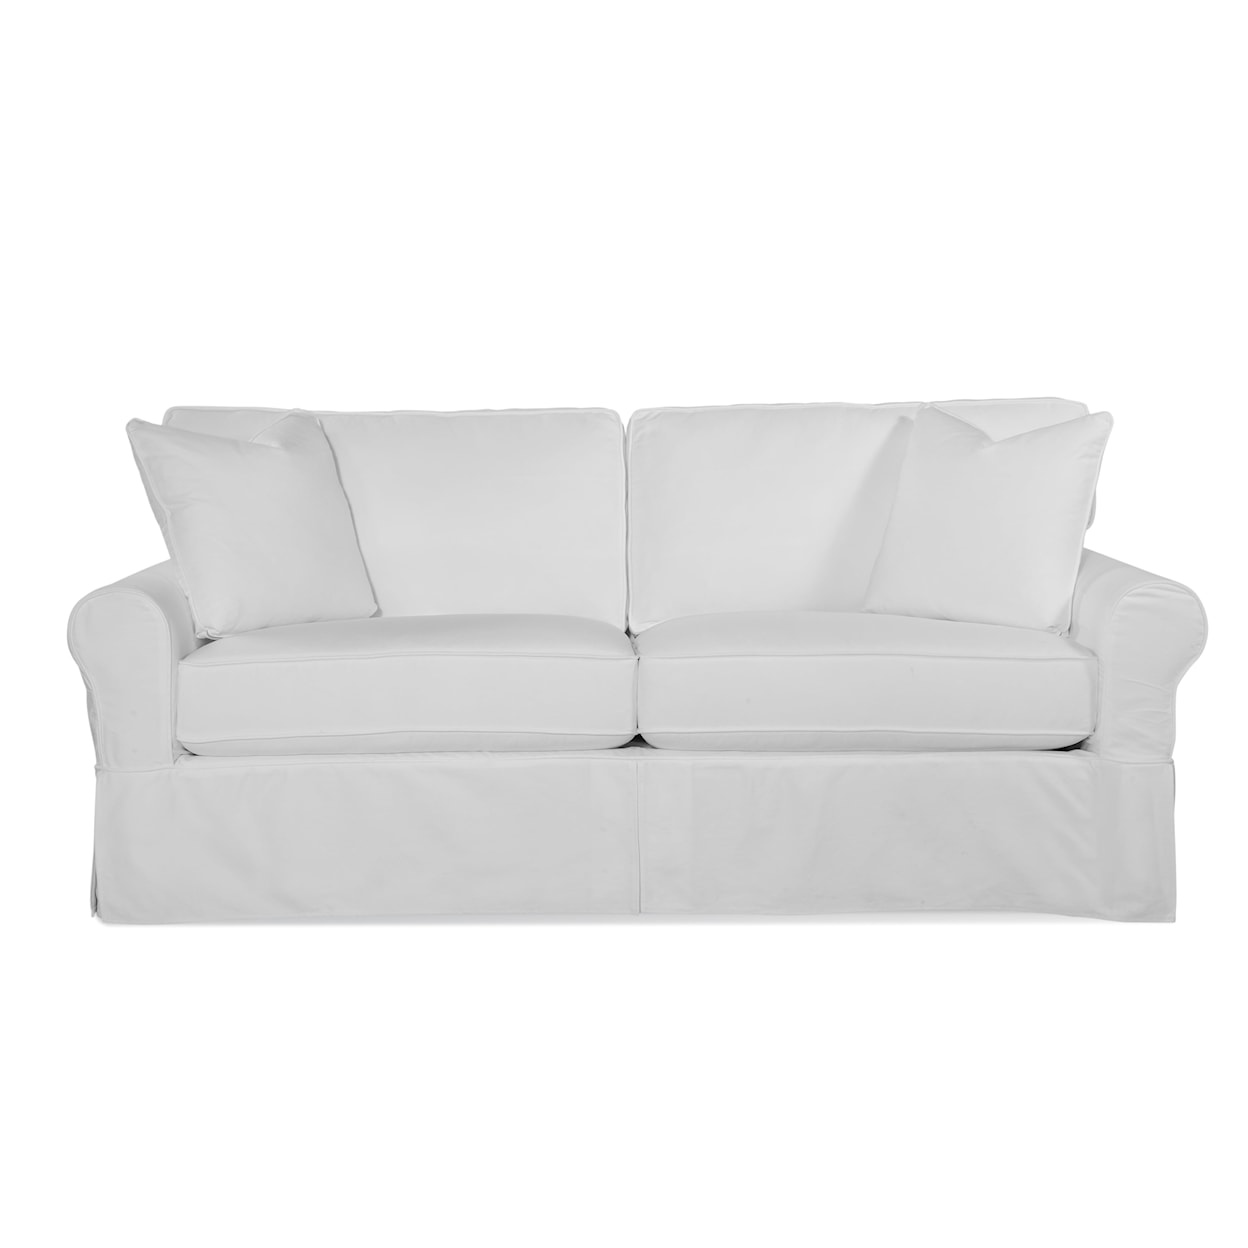 Braxton Culler Bedford Bedford 2 over 2 Queen Sleeper w/Slipcover